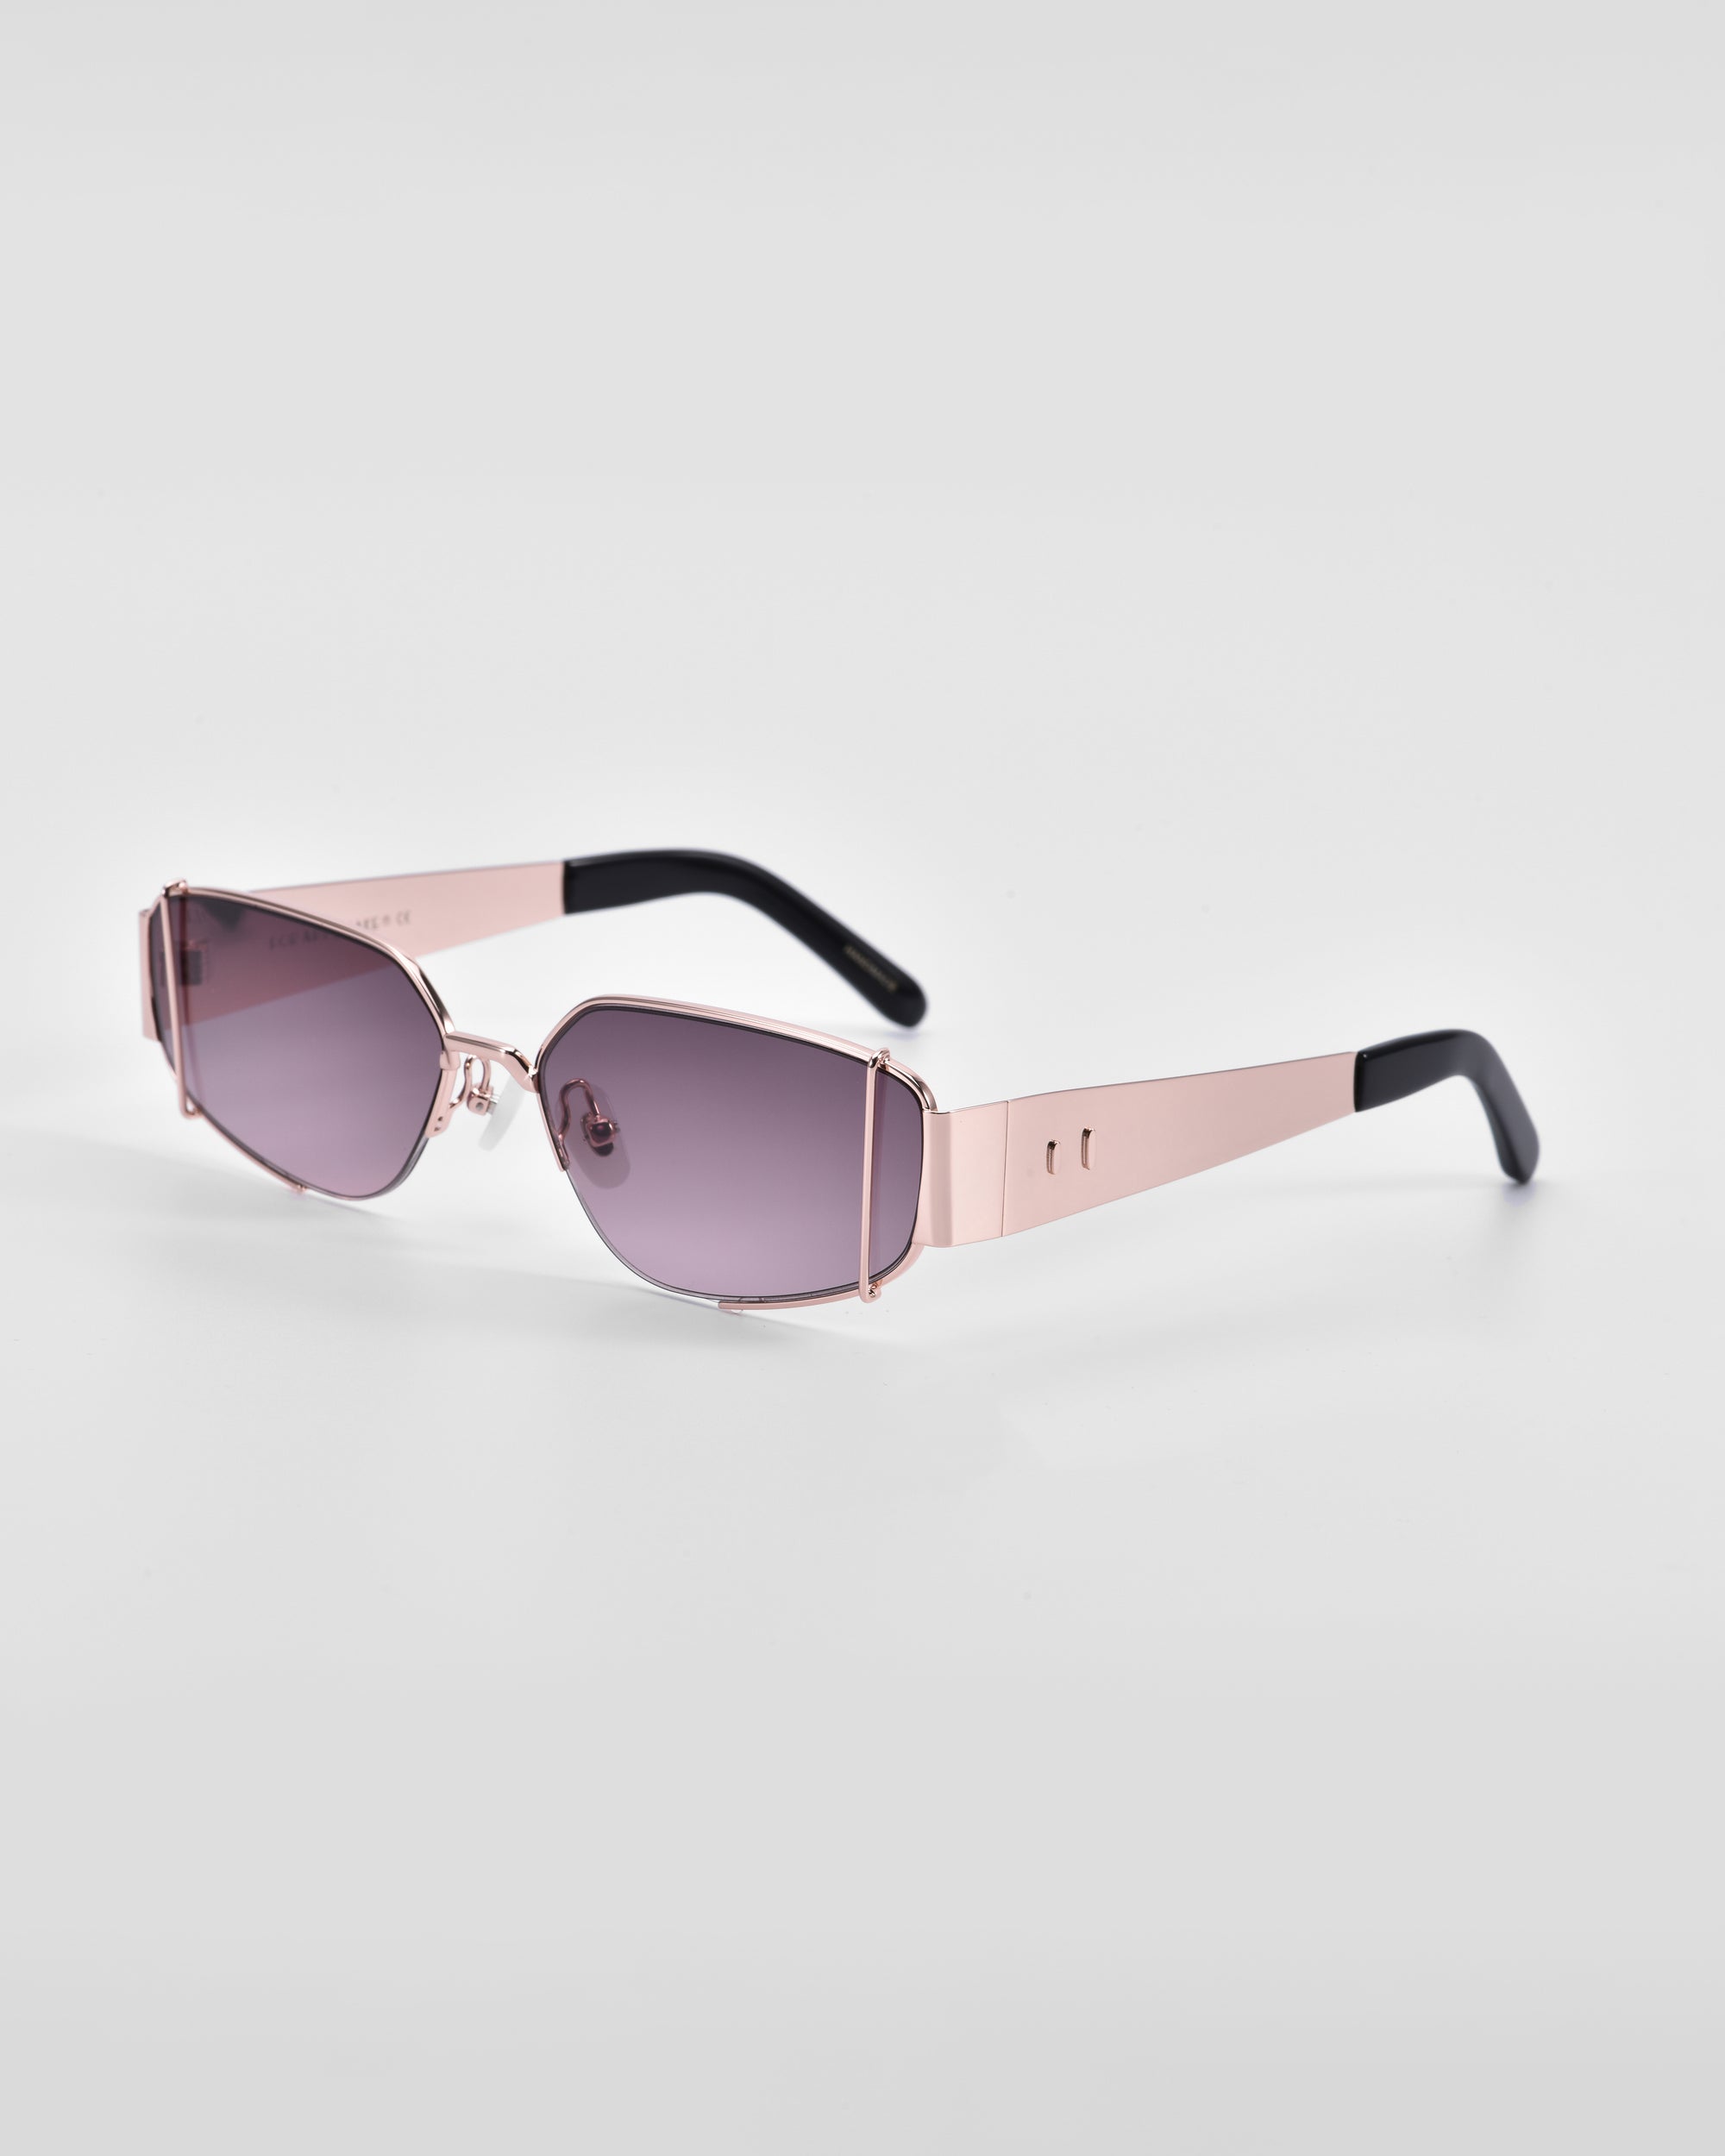 A pair of stylish sunglasses featuring rectangular, purple-tinted lenses and stunning 18-karat gold metal frames with black temple tips. The design is modern and sleek with thin, minimalist arms and clean lines, set against a plain white background. Presenting the Talia from For Art&#39;s Sake®.